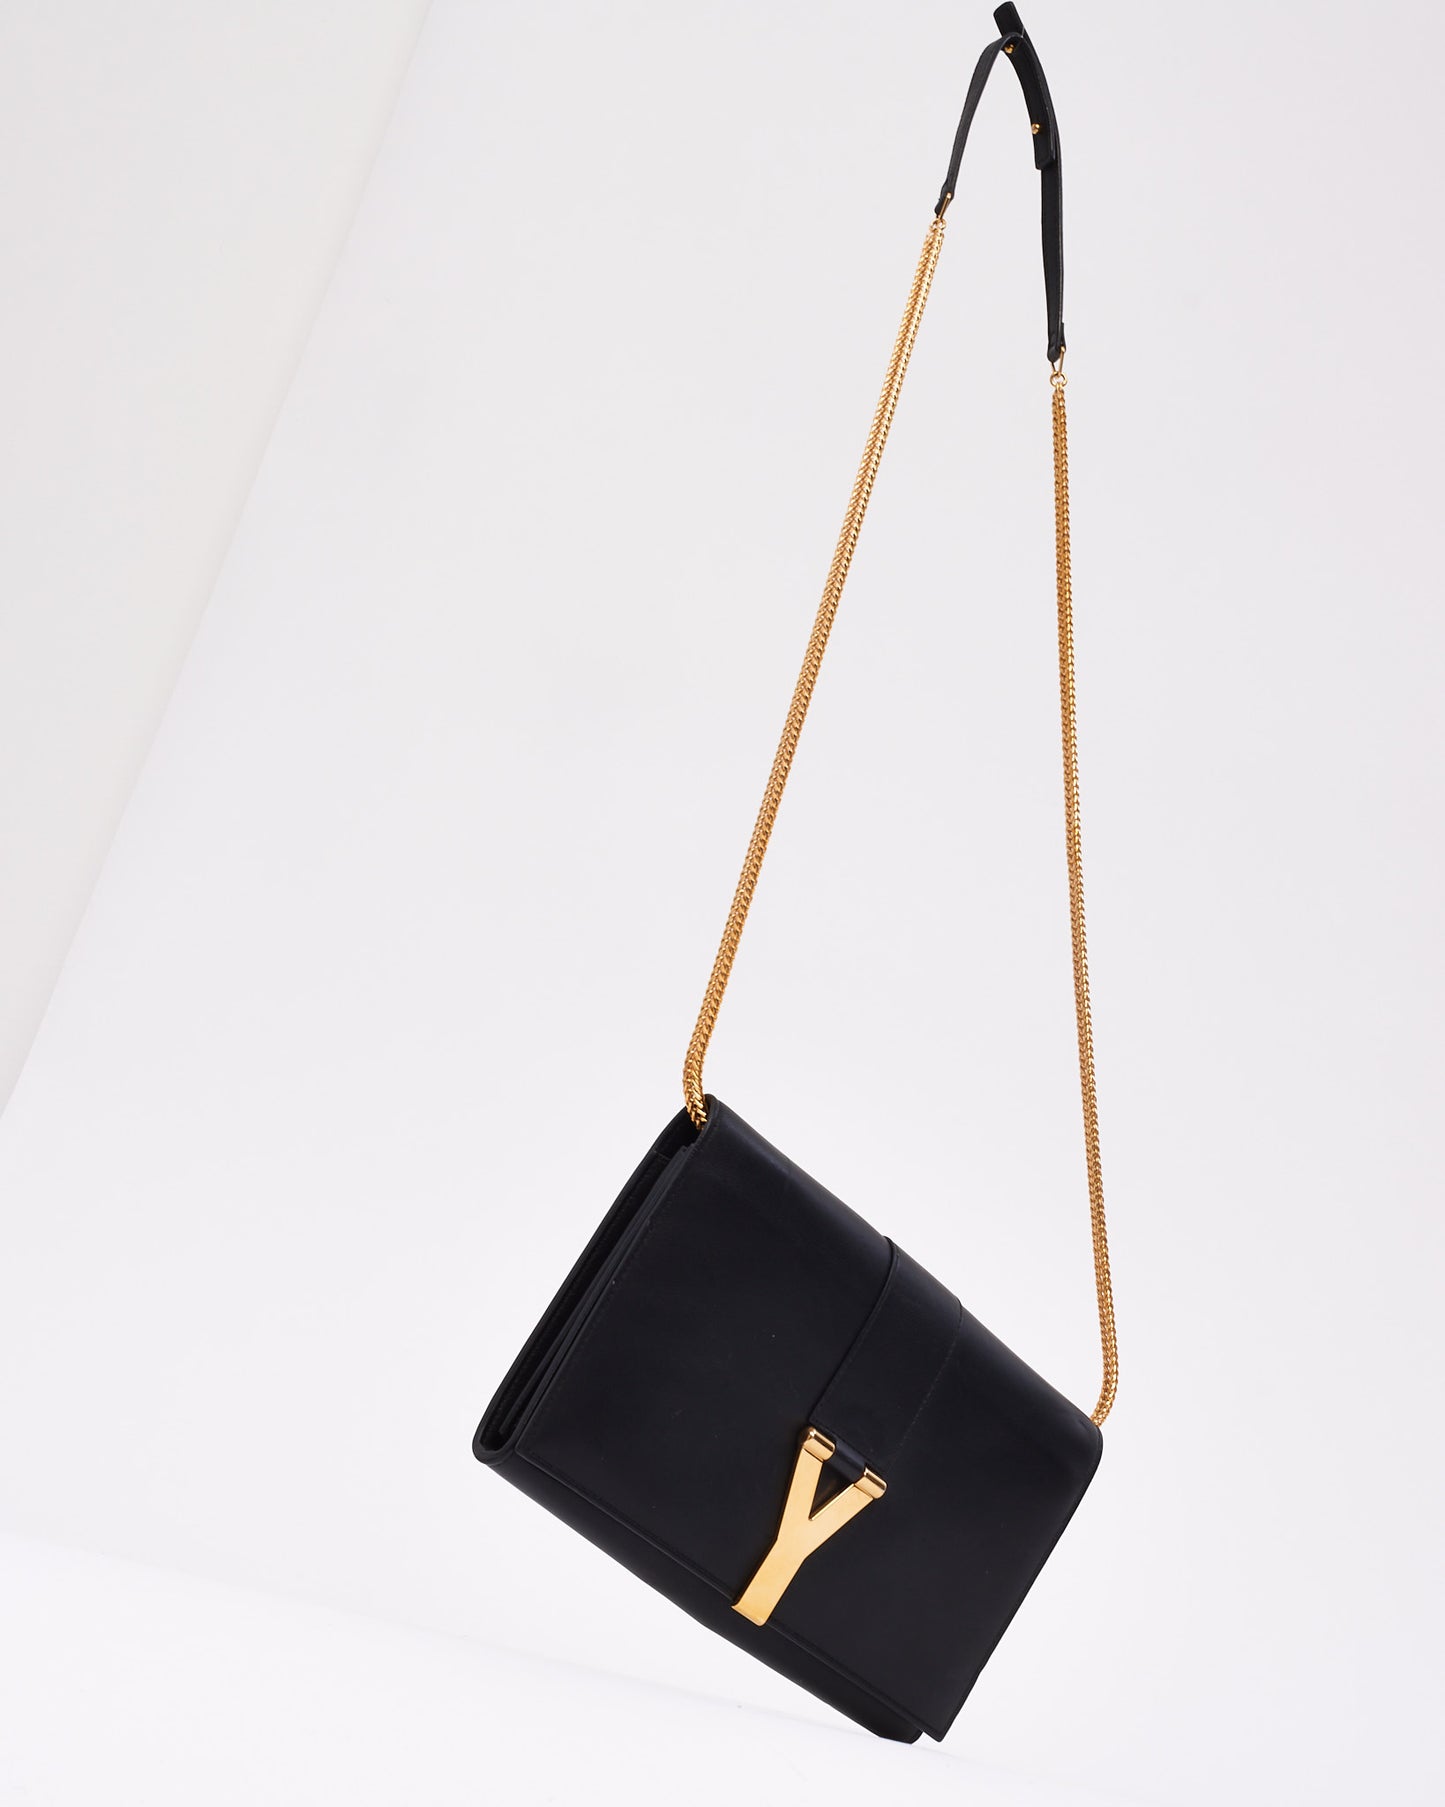 Saint Laurent Black Leather Y Chyc Clutch with Chain Strap